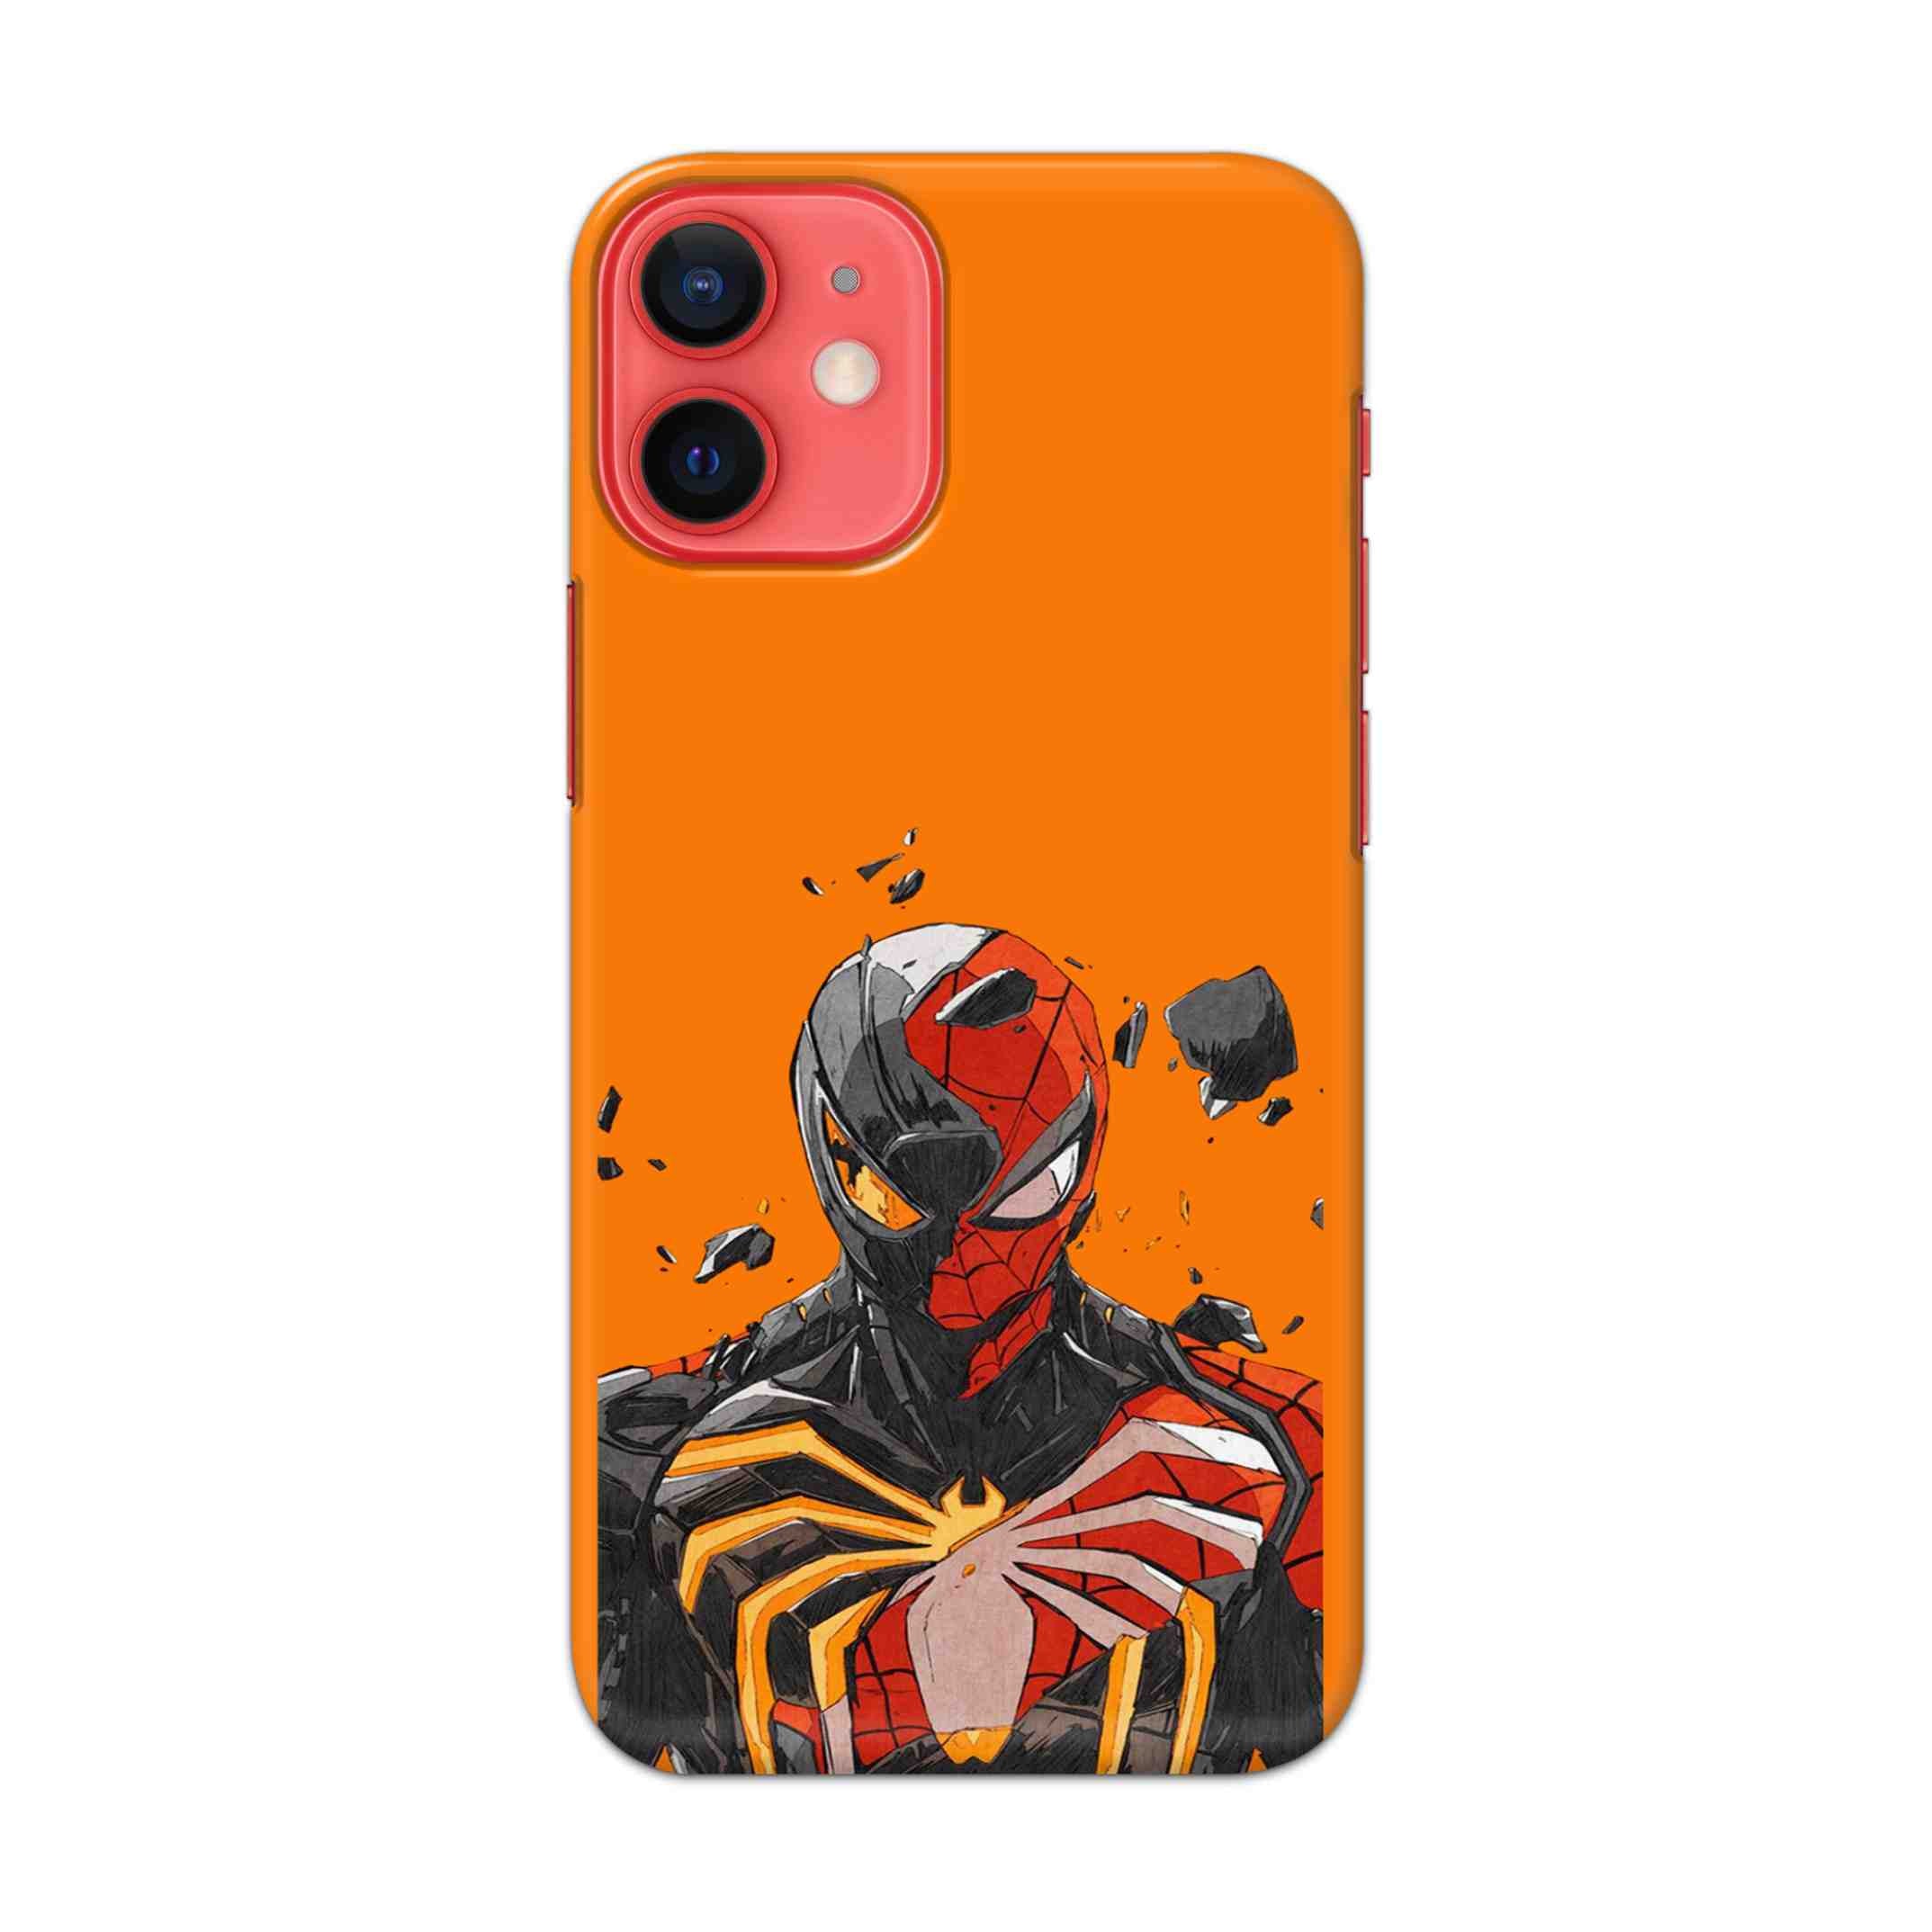 Buy Spiderman With Venom Hard Back Mobile Phone Case/Cover For Apple iPhone 12 mini Online